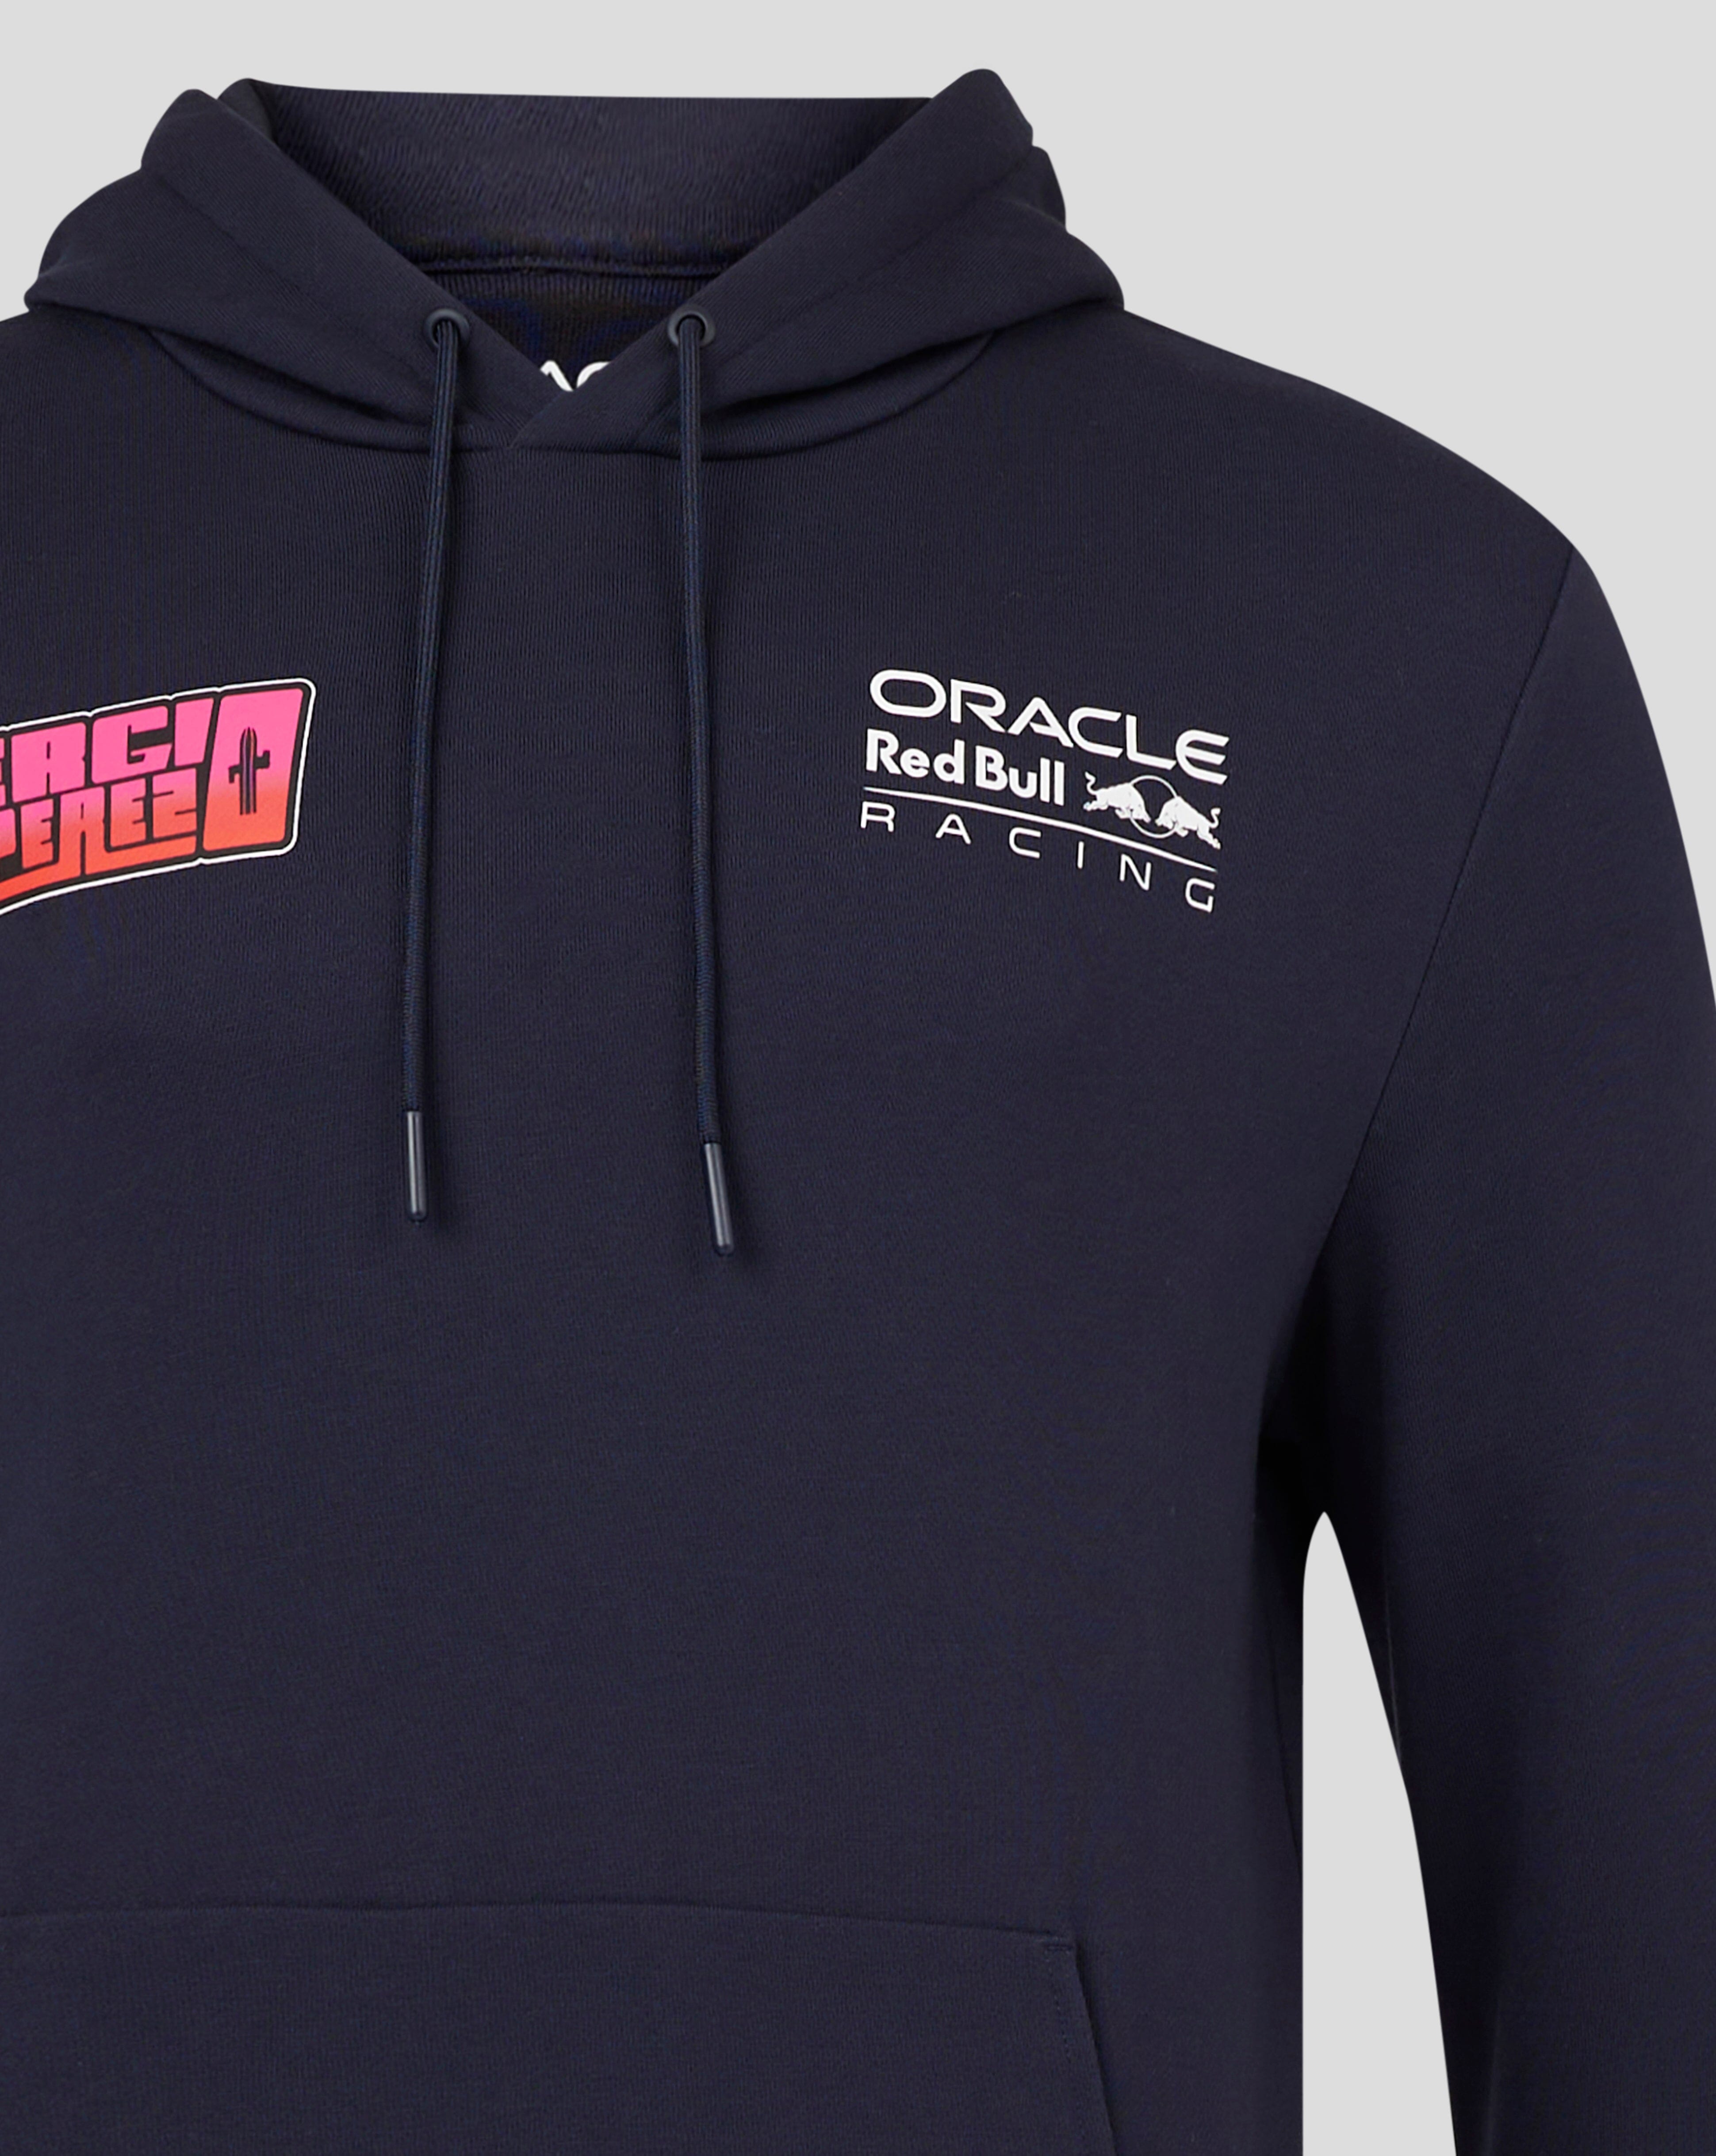 Red Bull Racing F1 Sergio "Checo" Perez Special Edition Mexico GP Hoodie -Navy